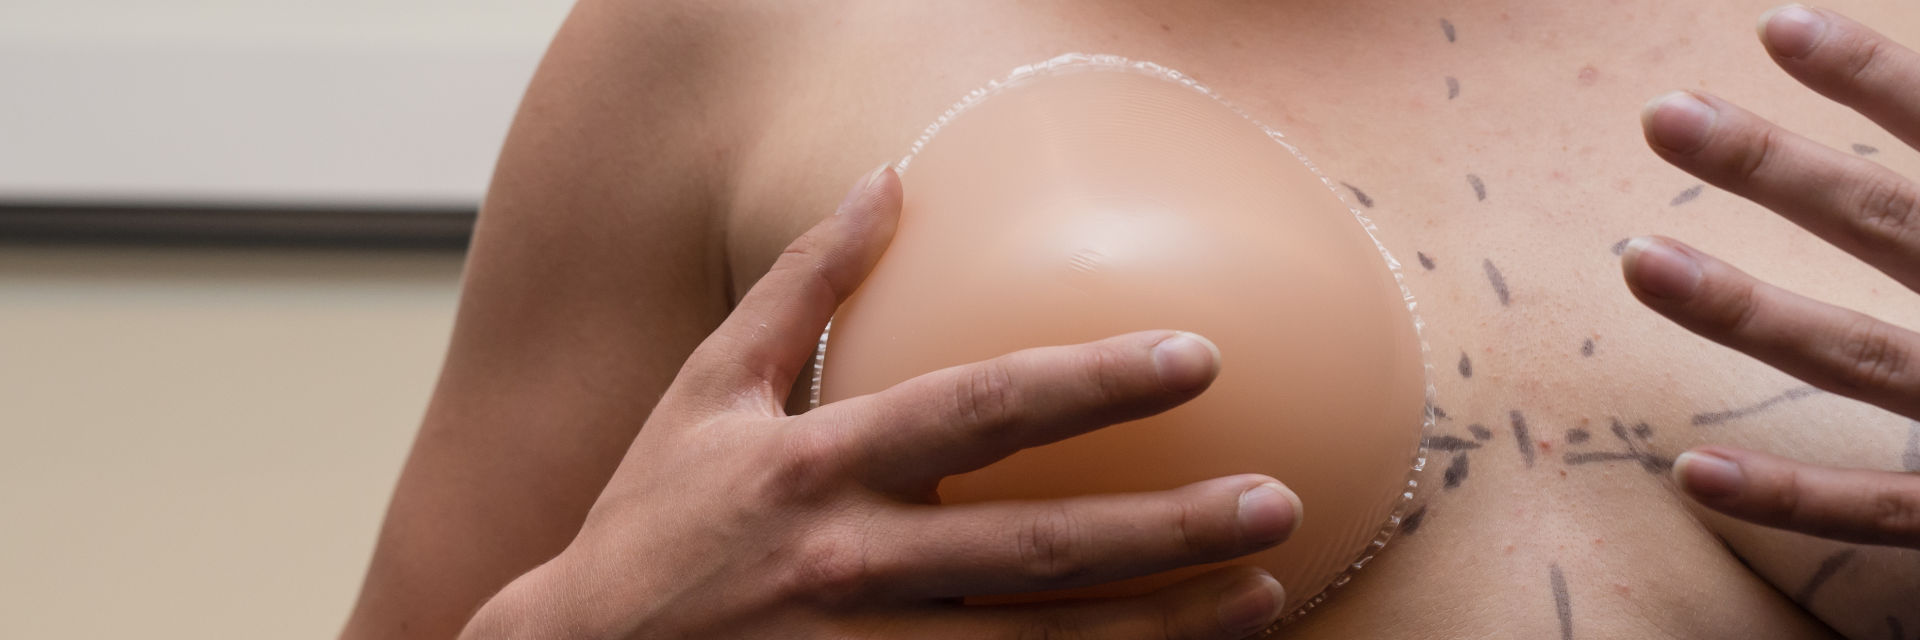 Woman pressing a breast implant to her breasts with pre-operative markings.